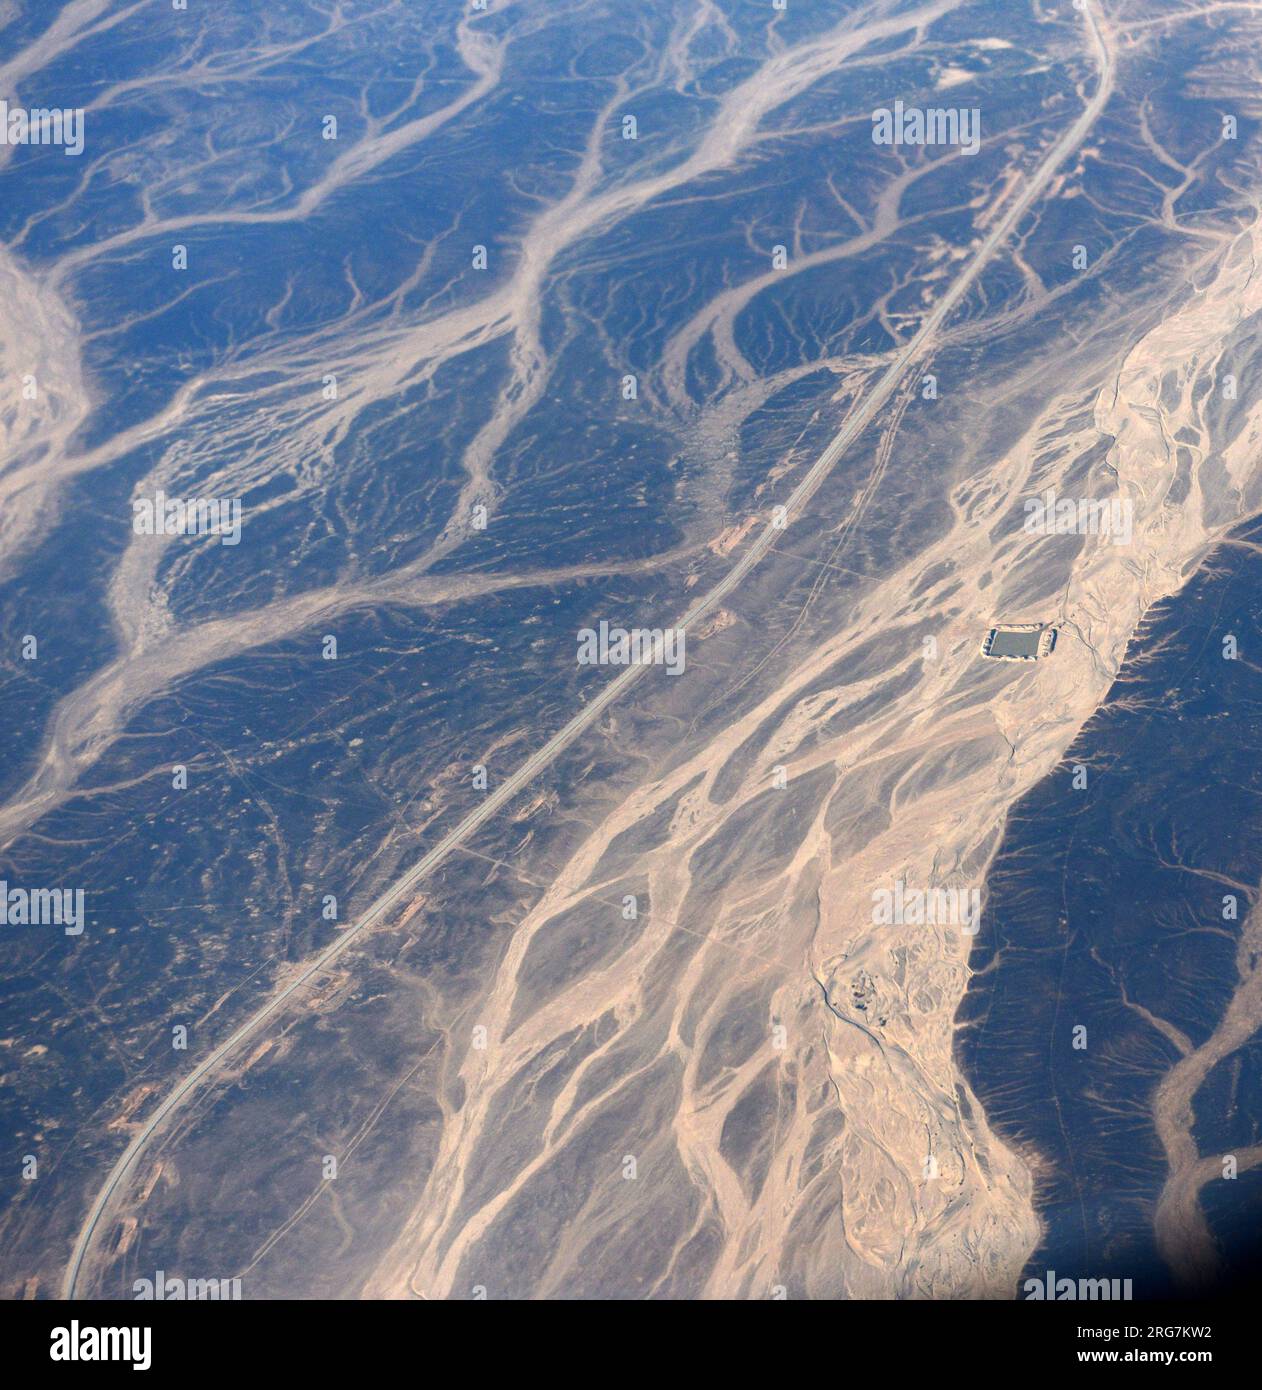 A Surreal aerial view of dried river beds in the desert in Jordan near the border with Saudi Arabia. Stock Photo